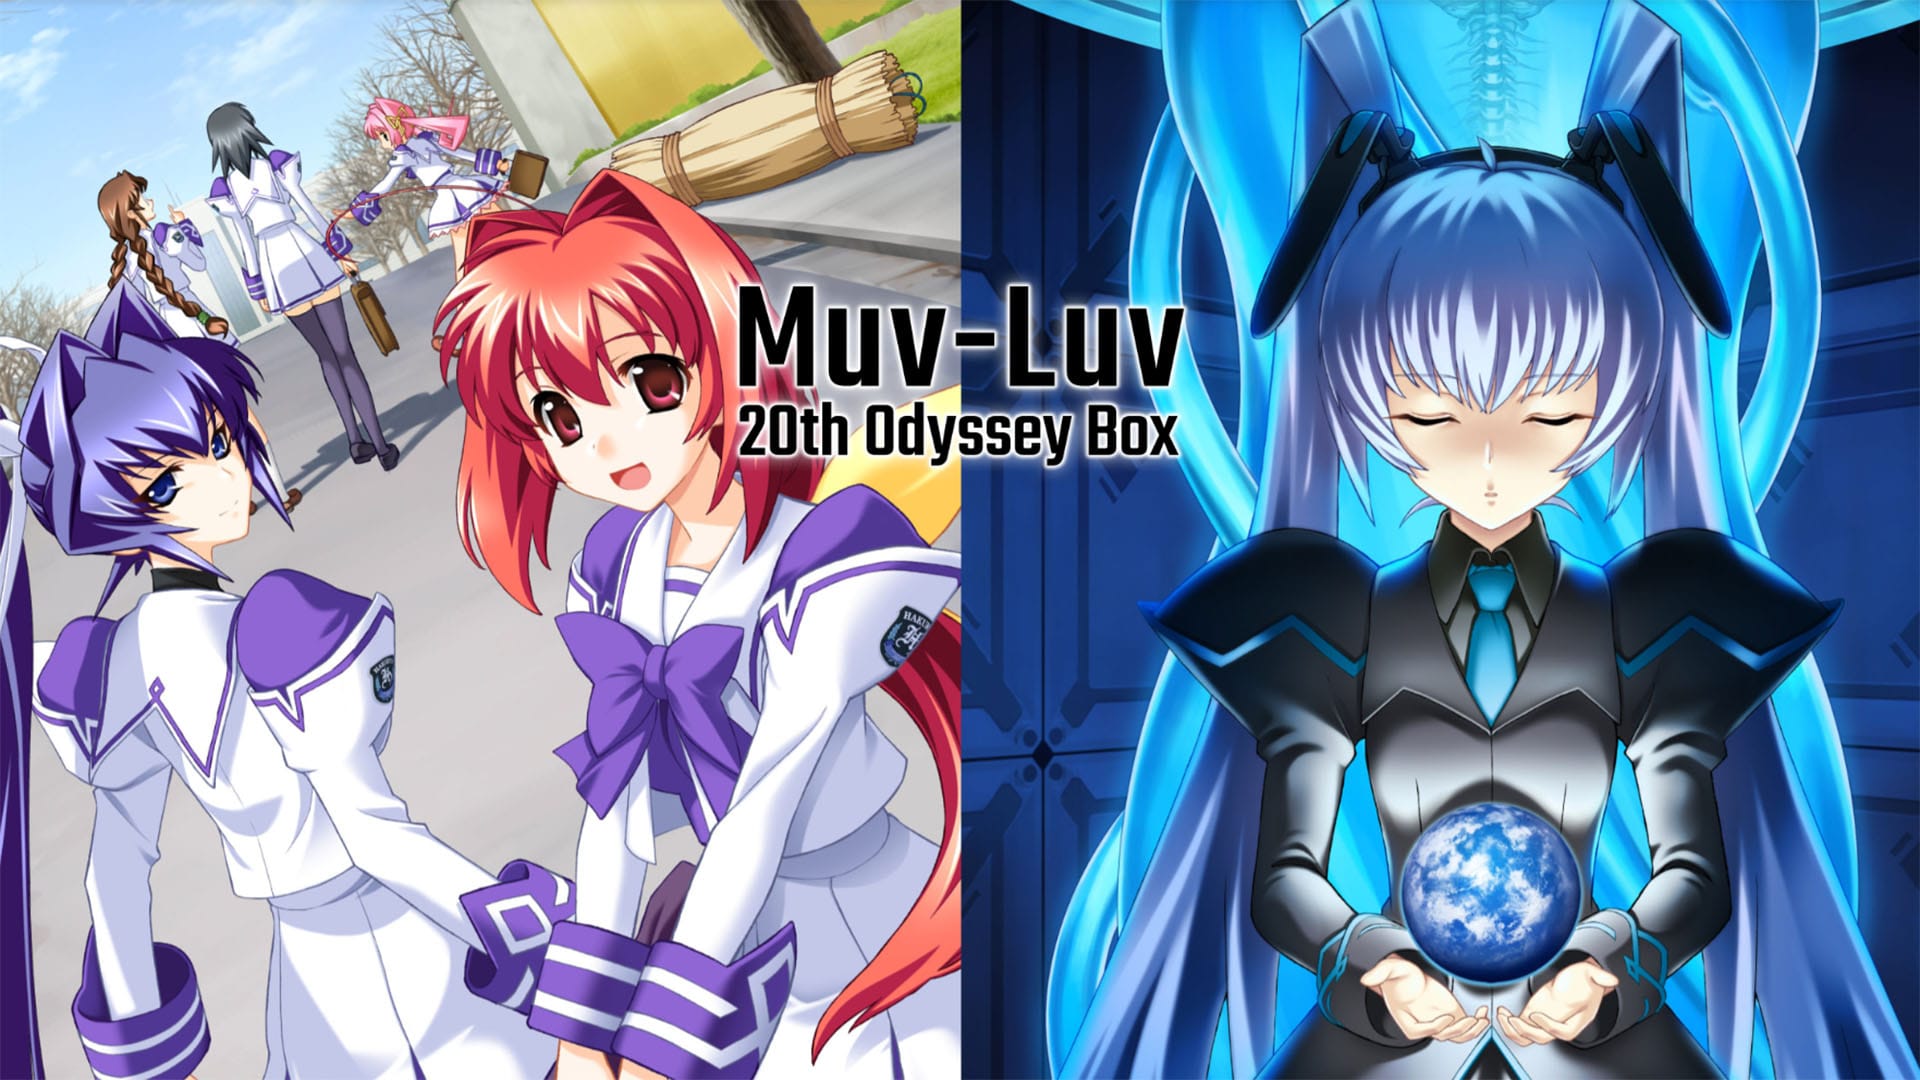 Muv-Luv 20th Odyssey Box for Nintendo Switch Gets Release Date